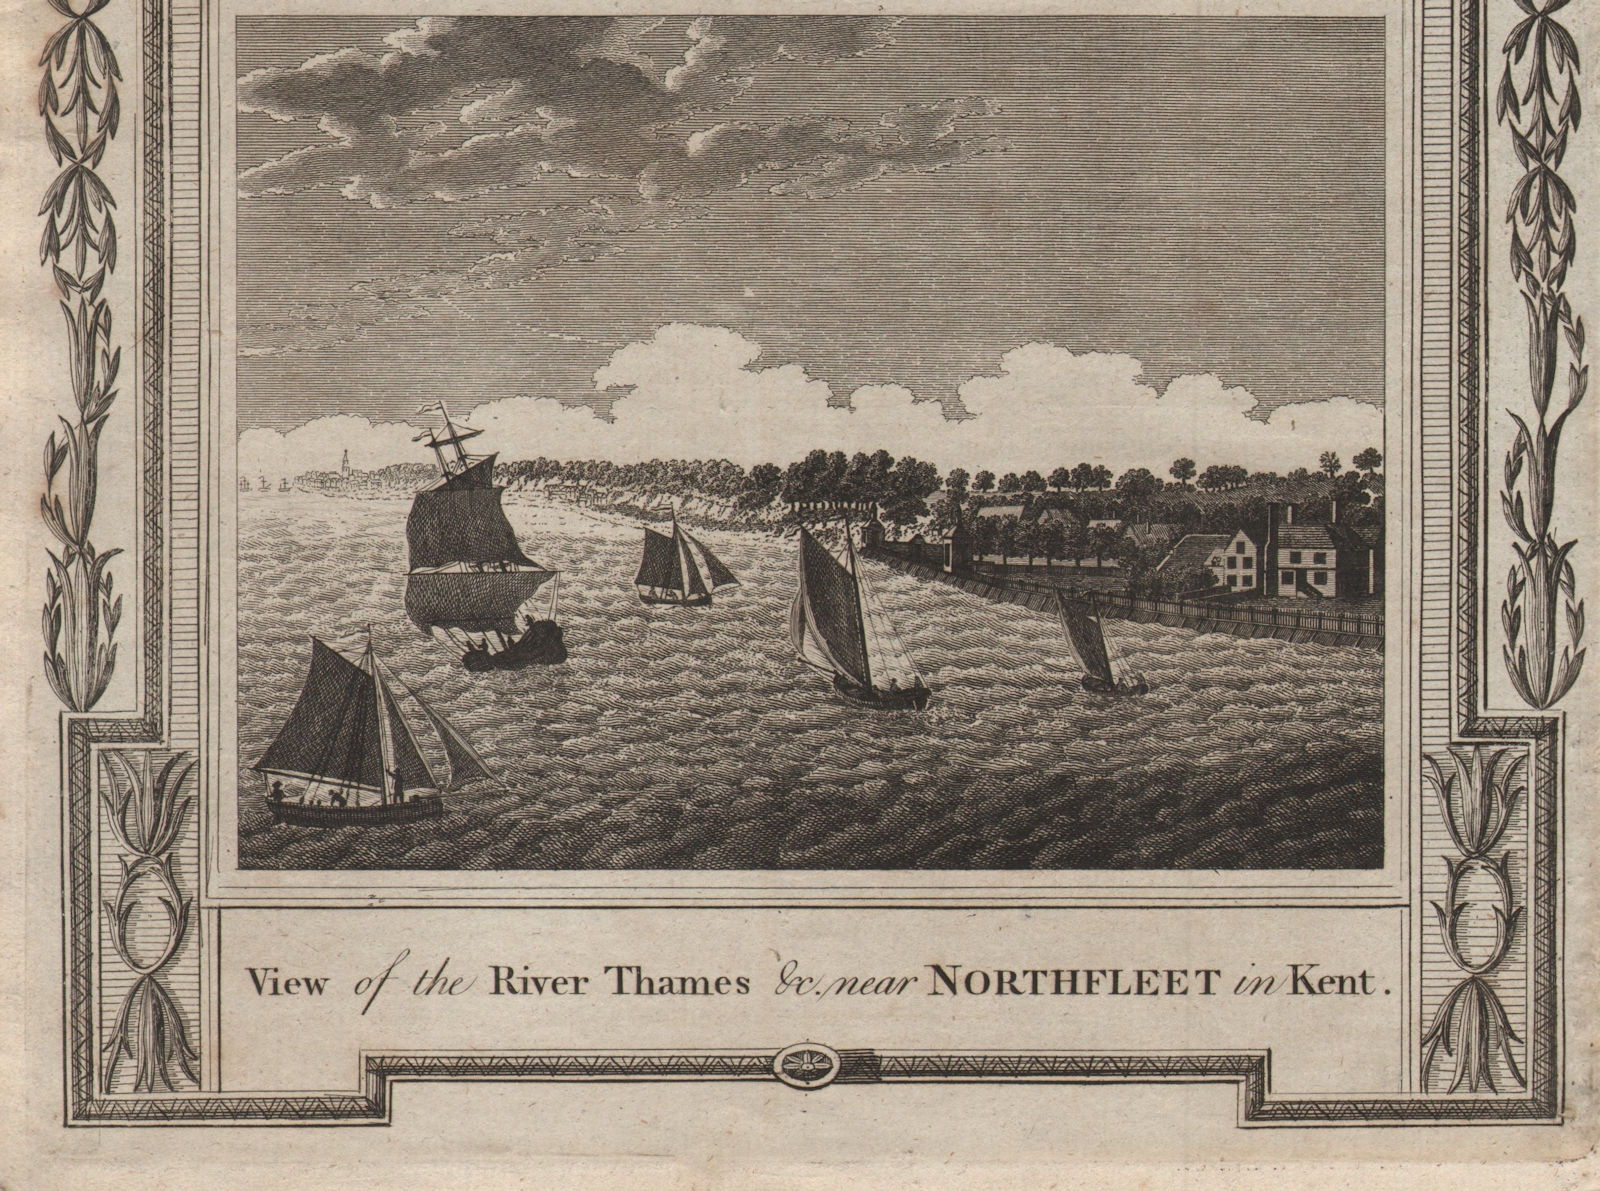 Associate Product View of the River Thames &c. near Northfleet in Kent. THORNTON 1784 old print